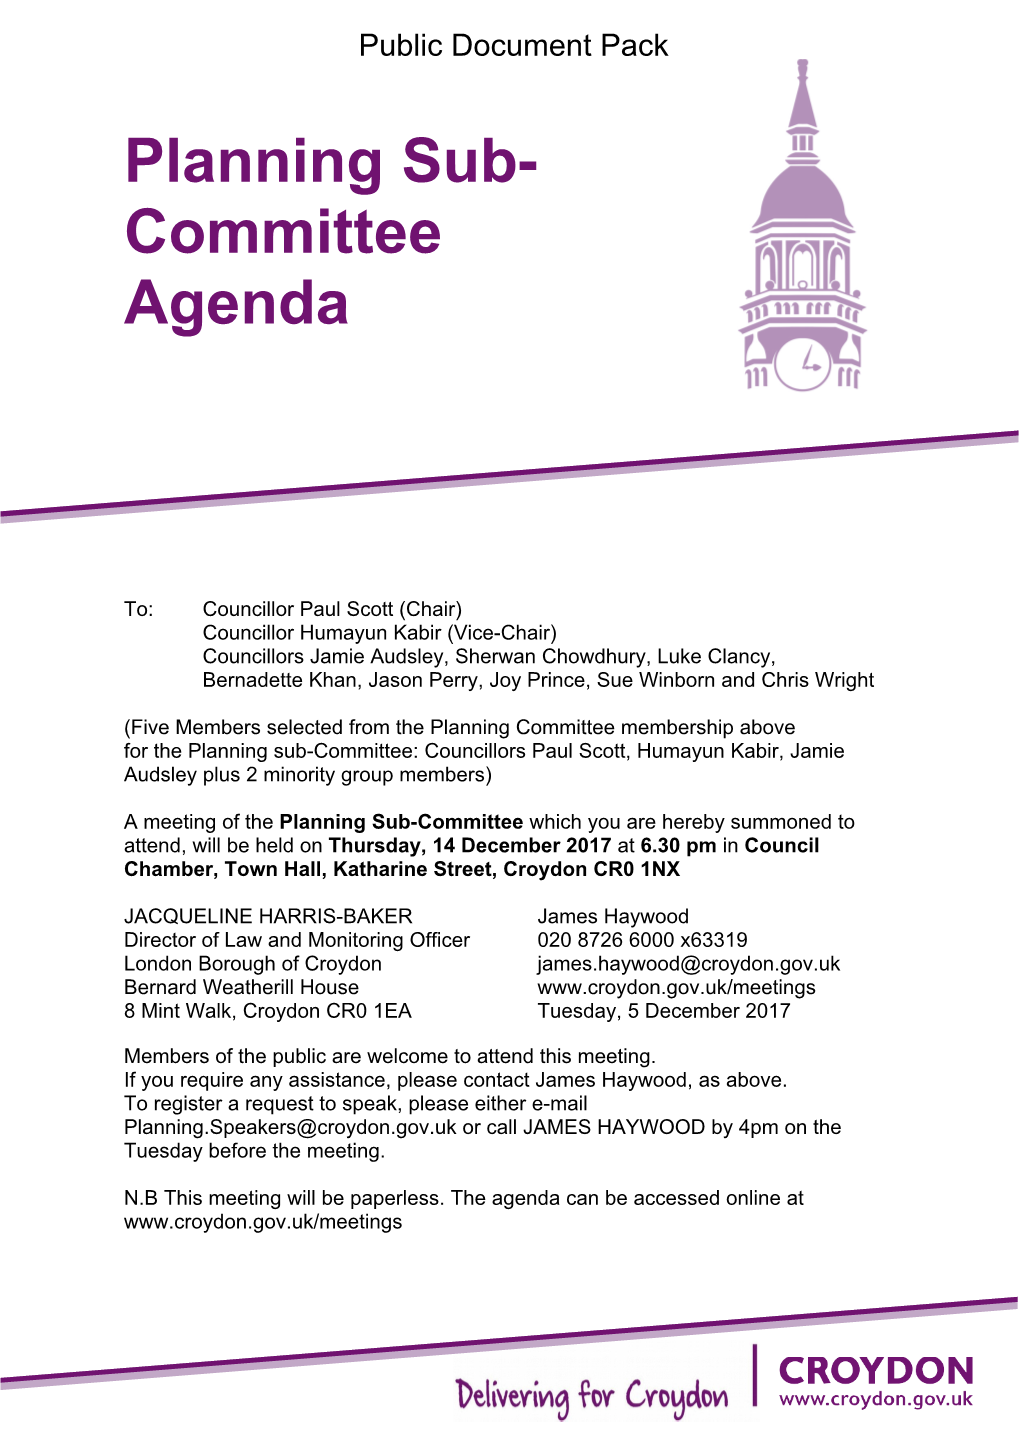 (Public Pack)Agenda Document for Planning Sub-Committee, 14/12